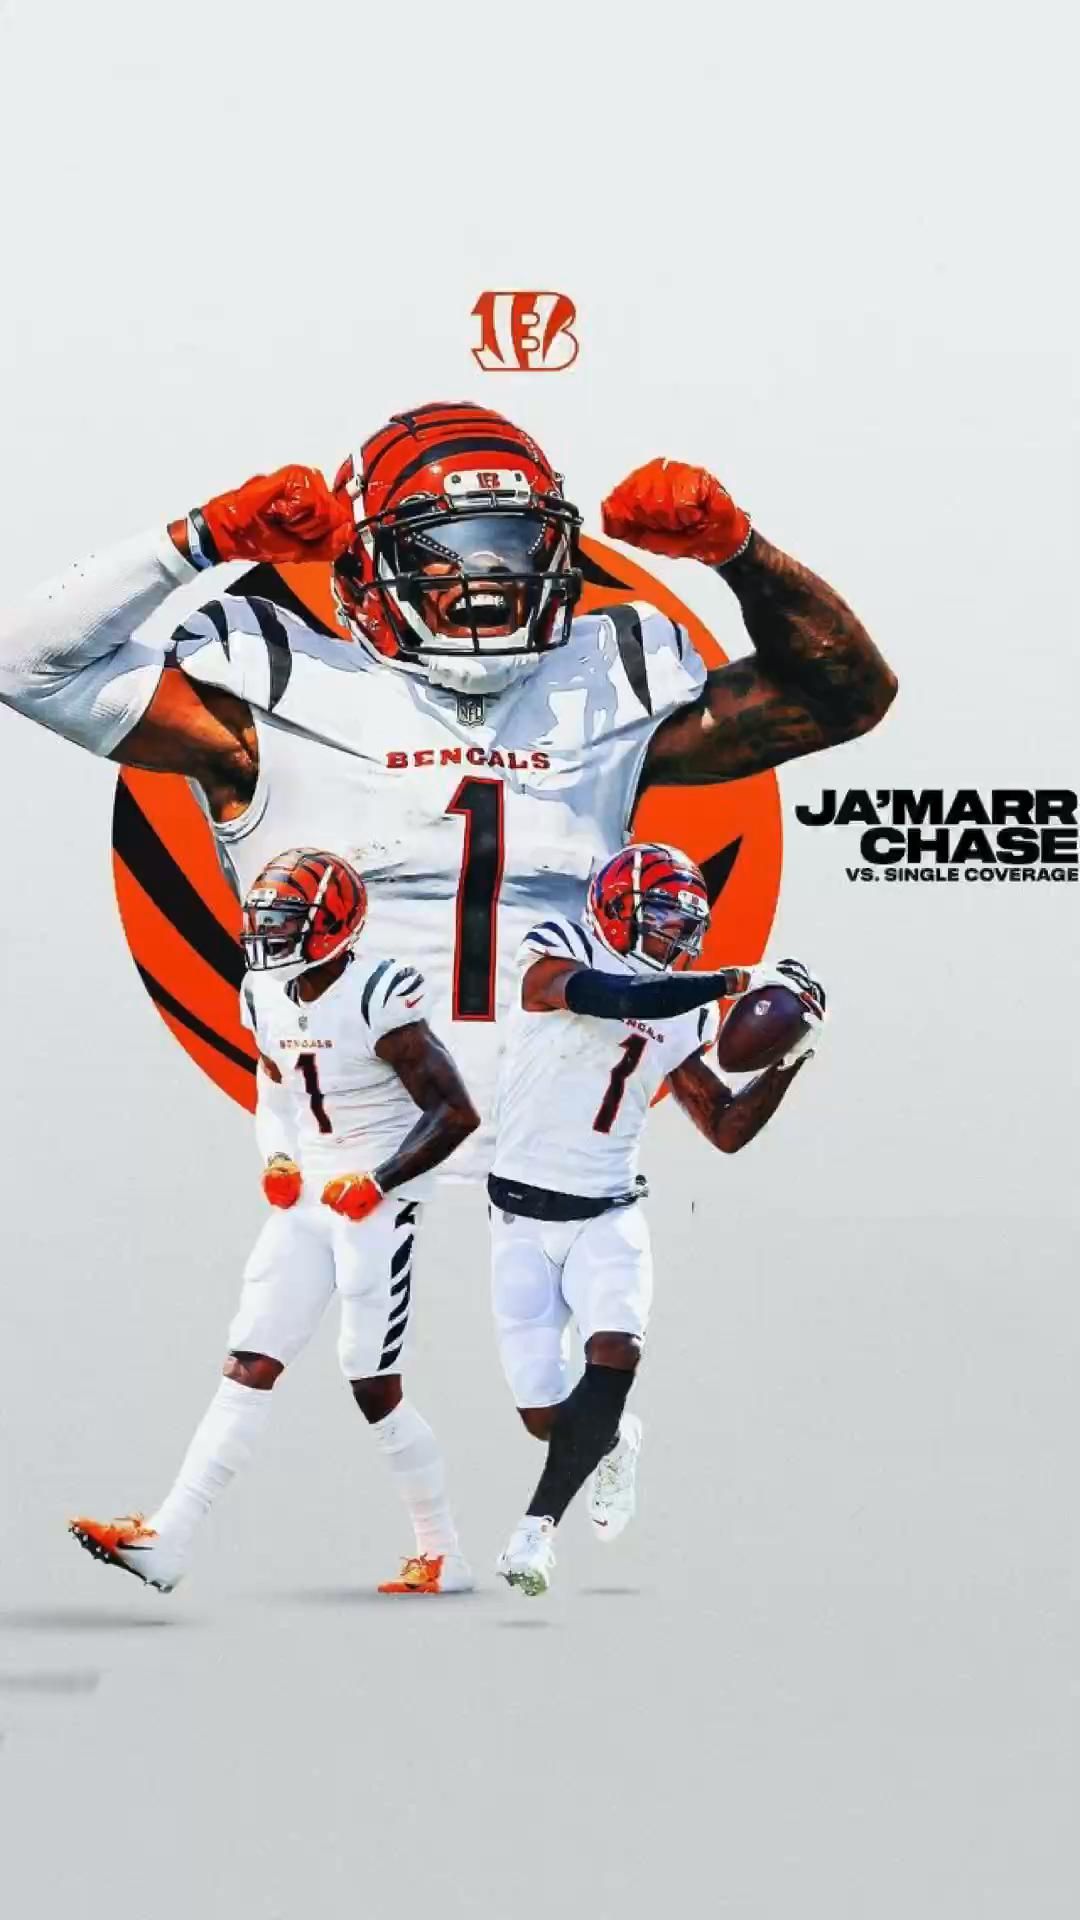 Ja'marr chase. Nfl football wallpaper, Bengals football, Nfl football picture